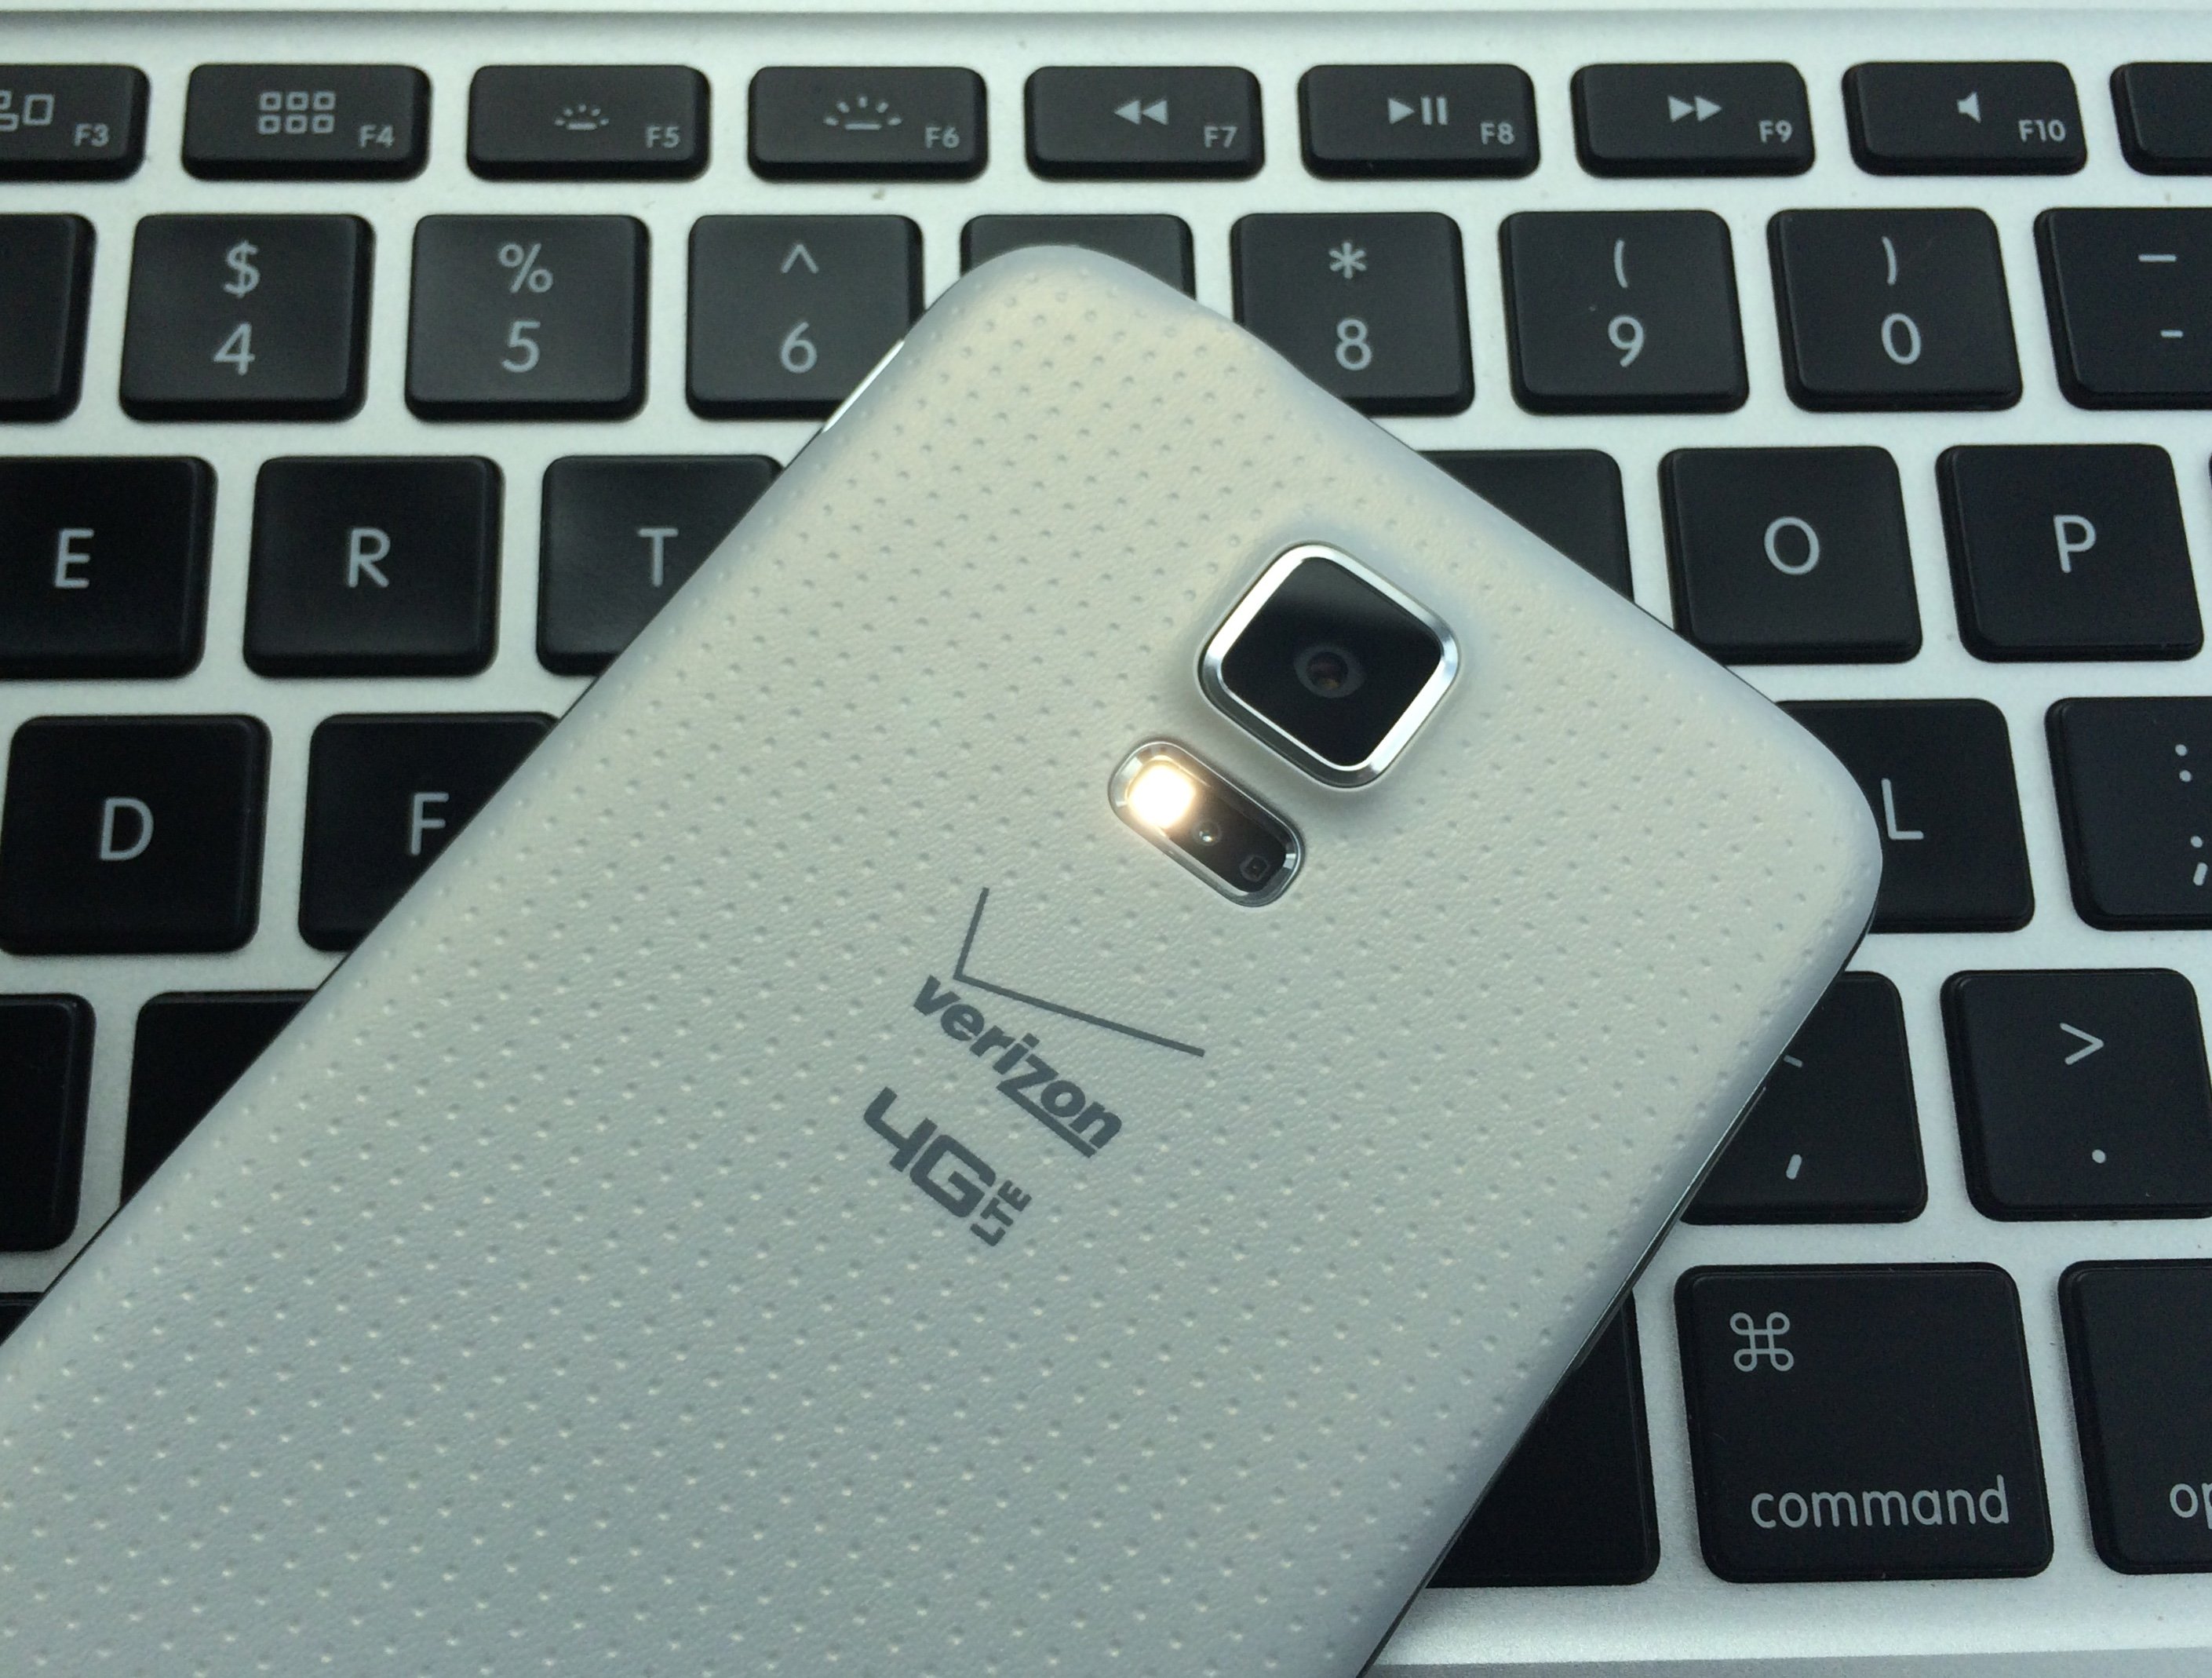 Learn how to use the Galaxy S5 flashlight that is included with the phone.